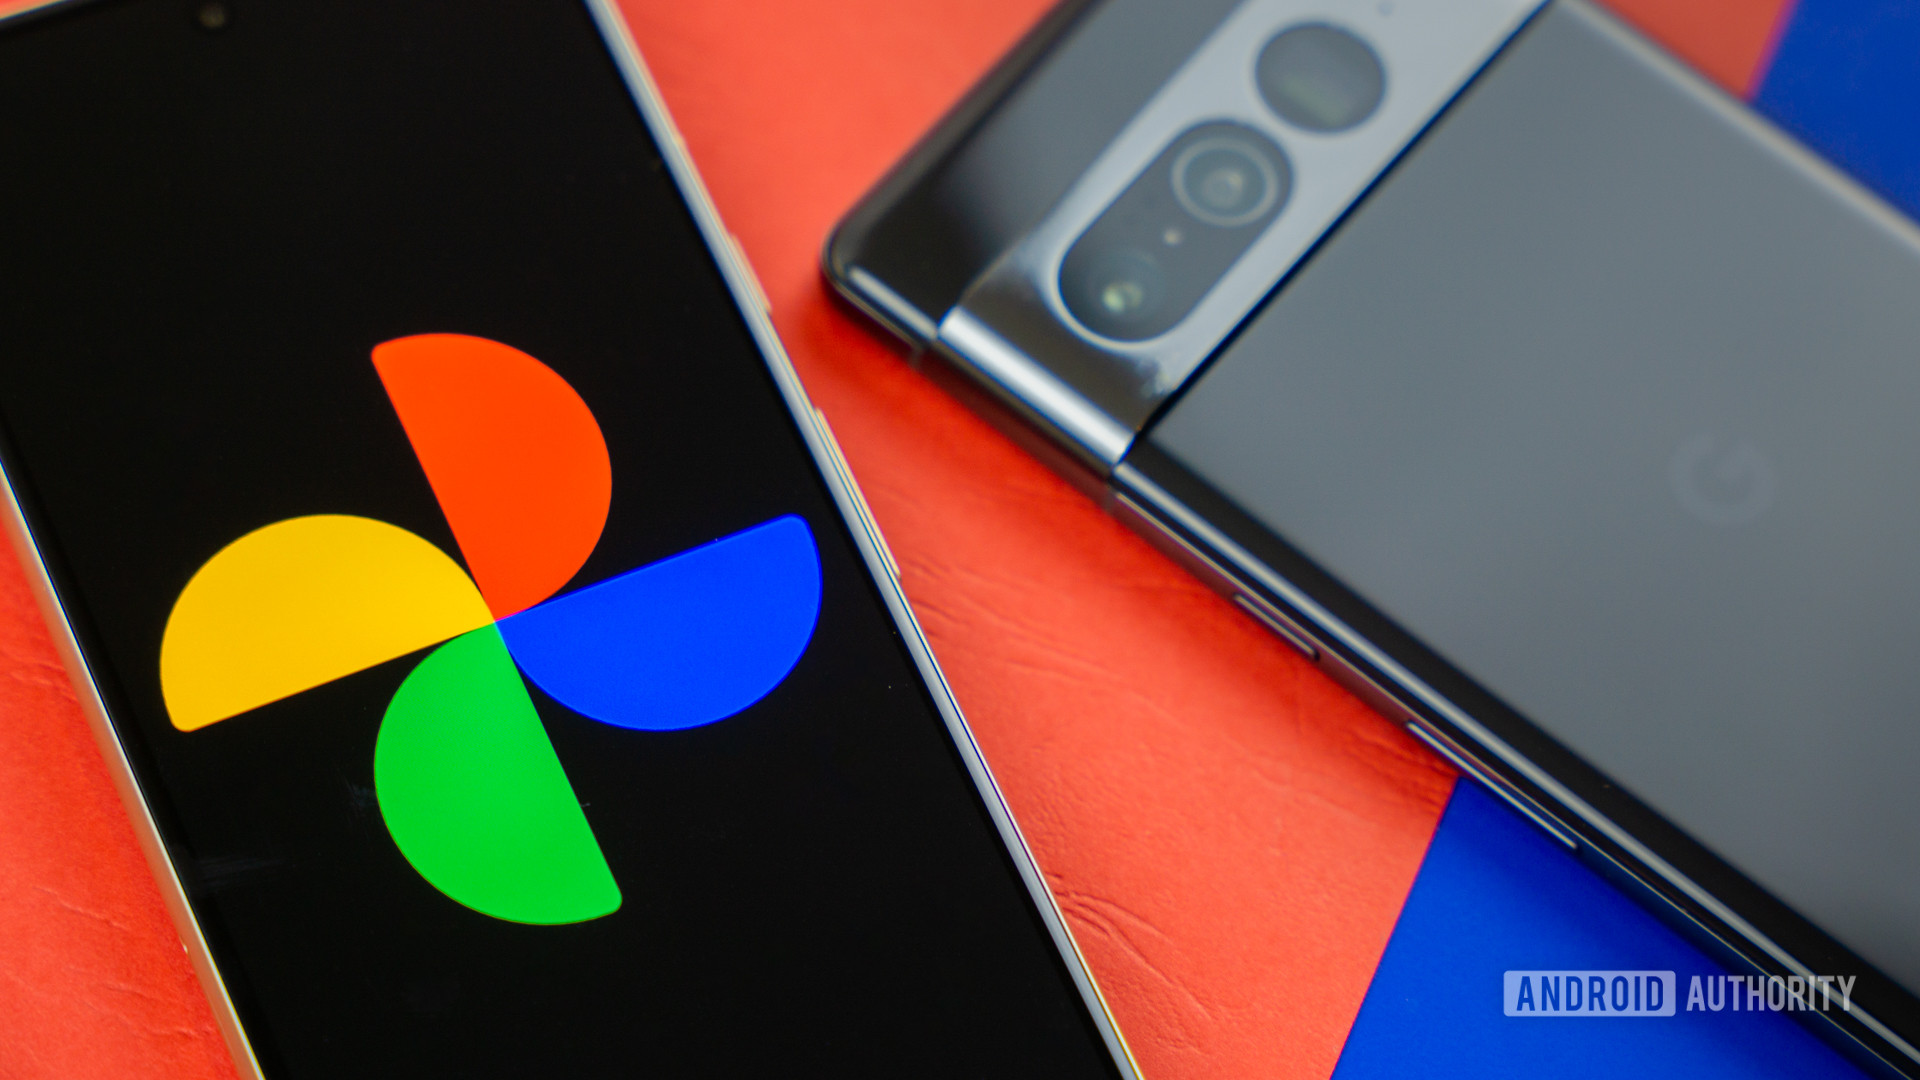 Google Photos logo on smartphone next to other devices and picture frame Stock photo 4